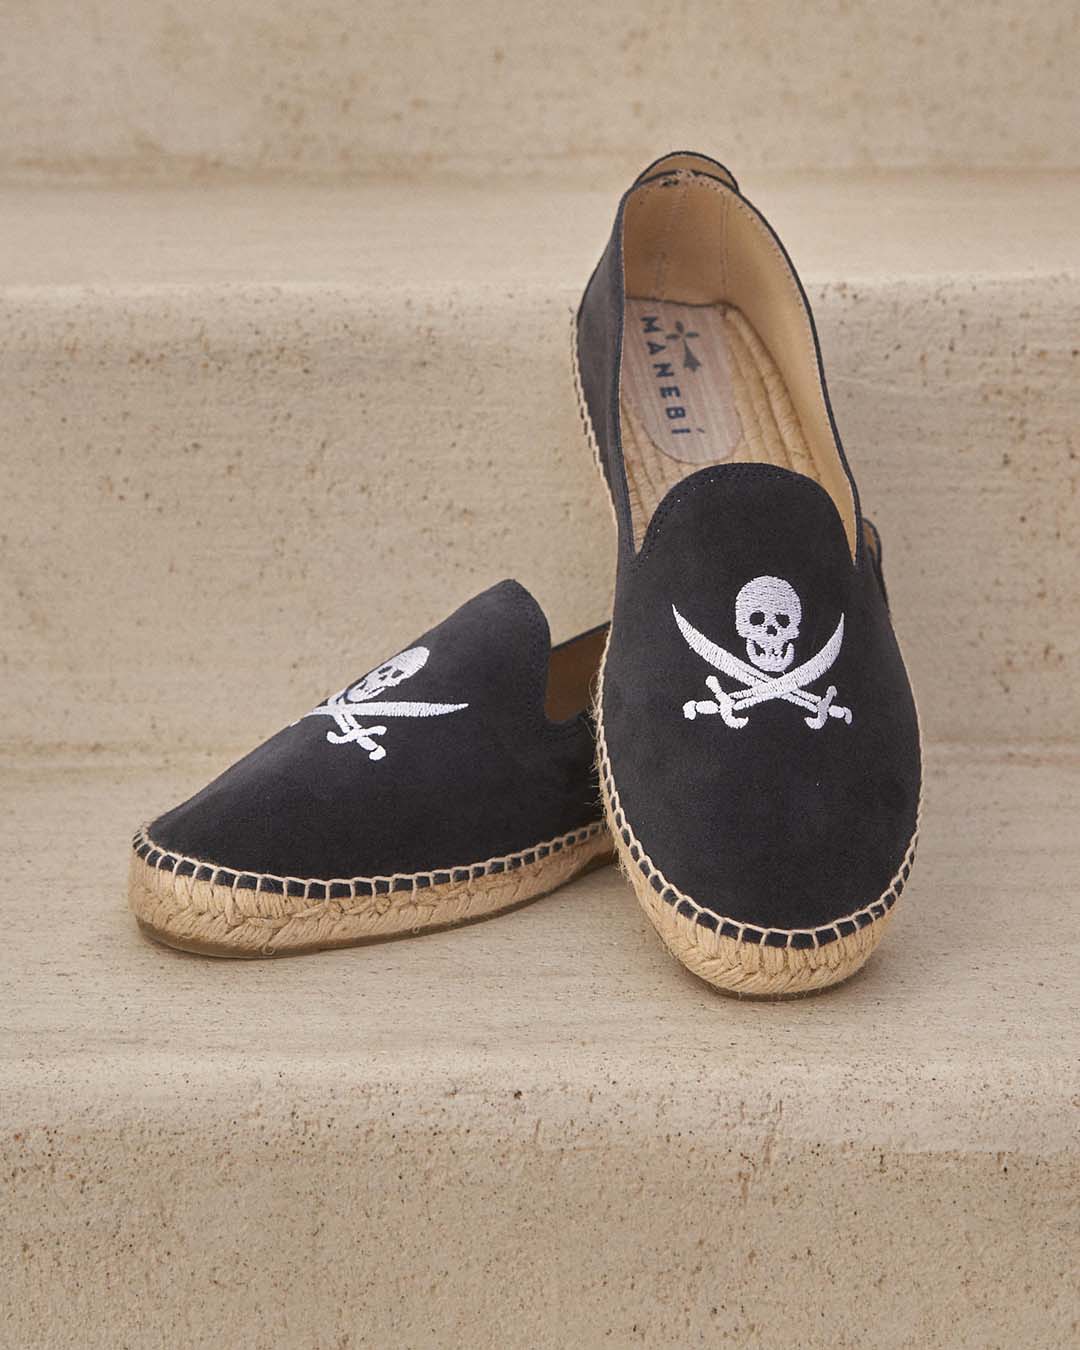 Espadrilles - Palm Springs - Patriot Blue with White Skull